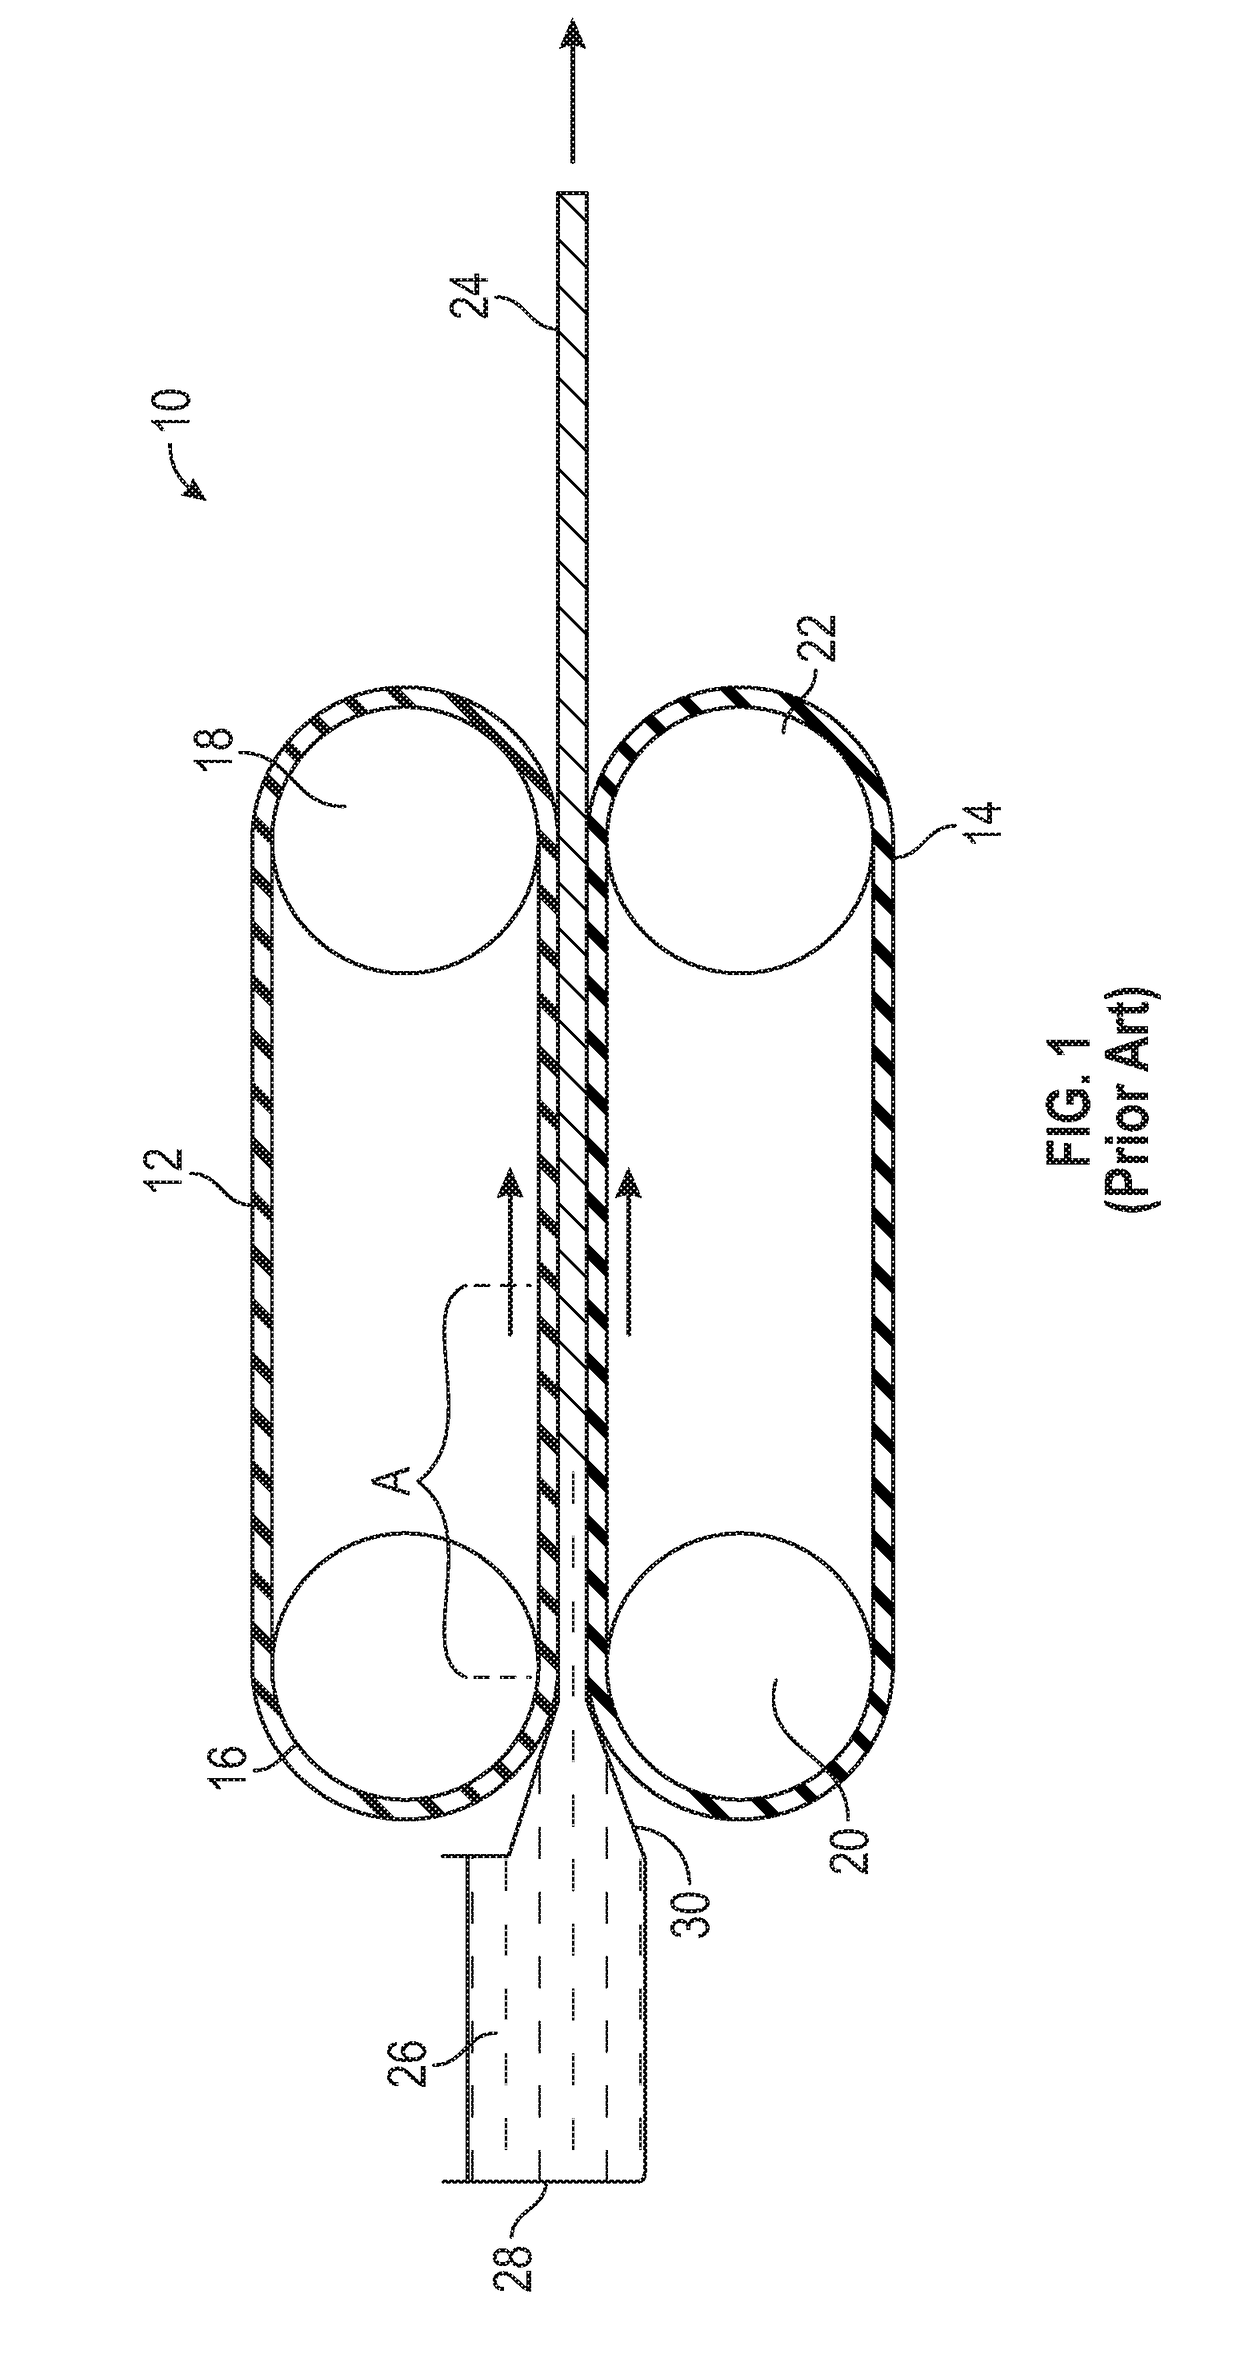 System and method for continuous casting